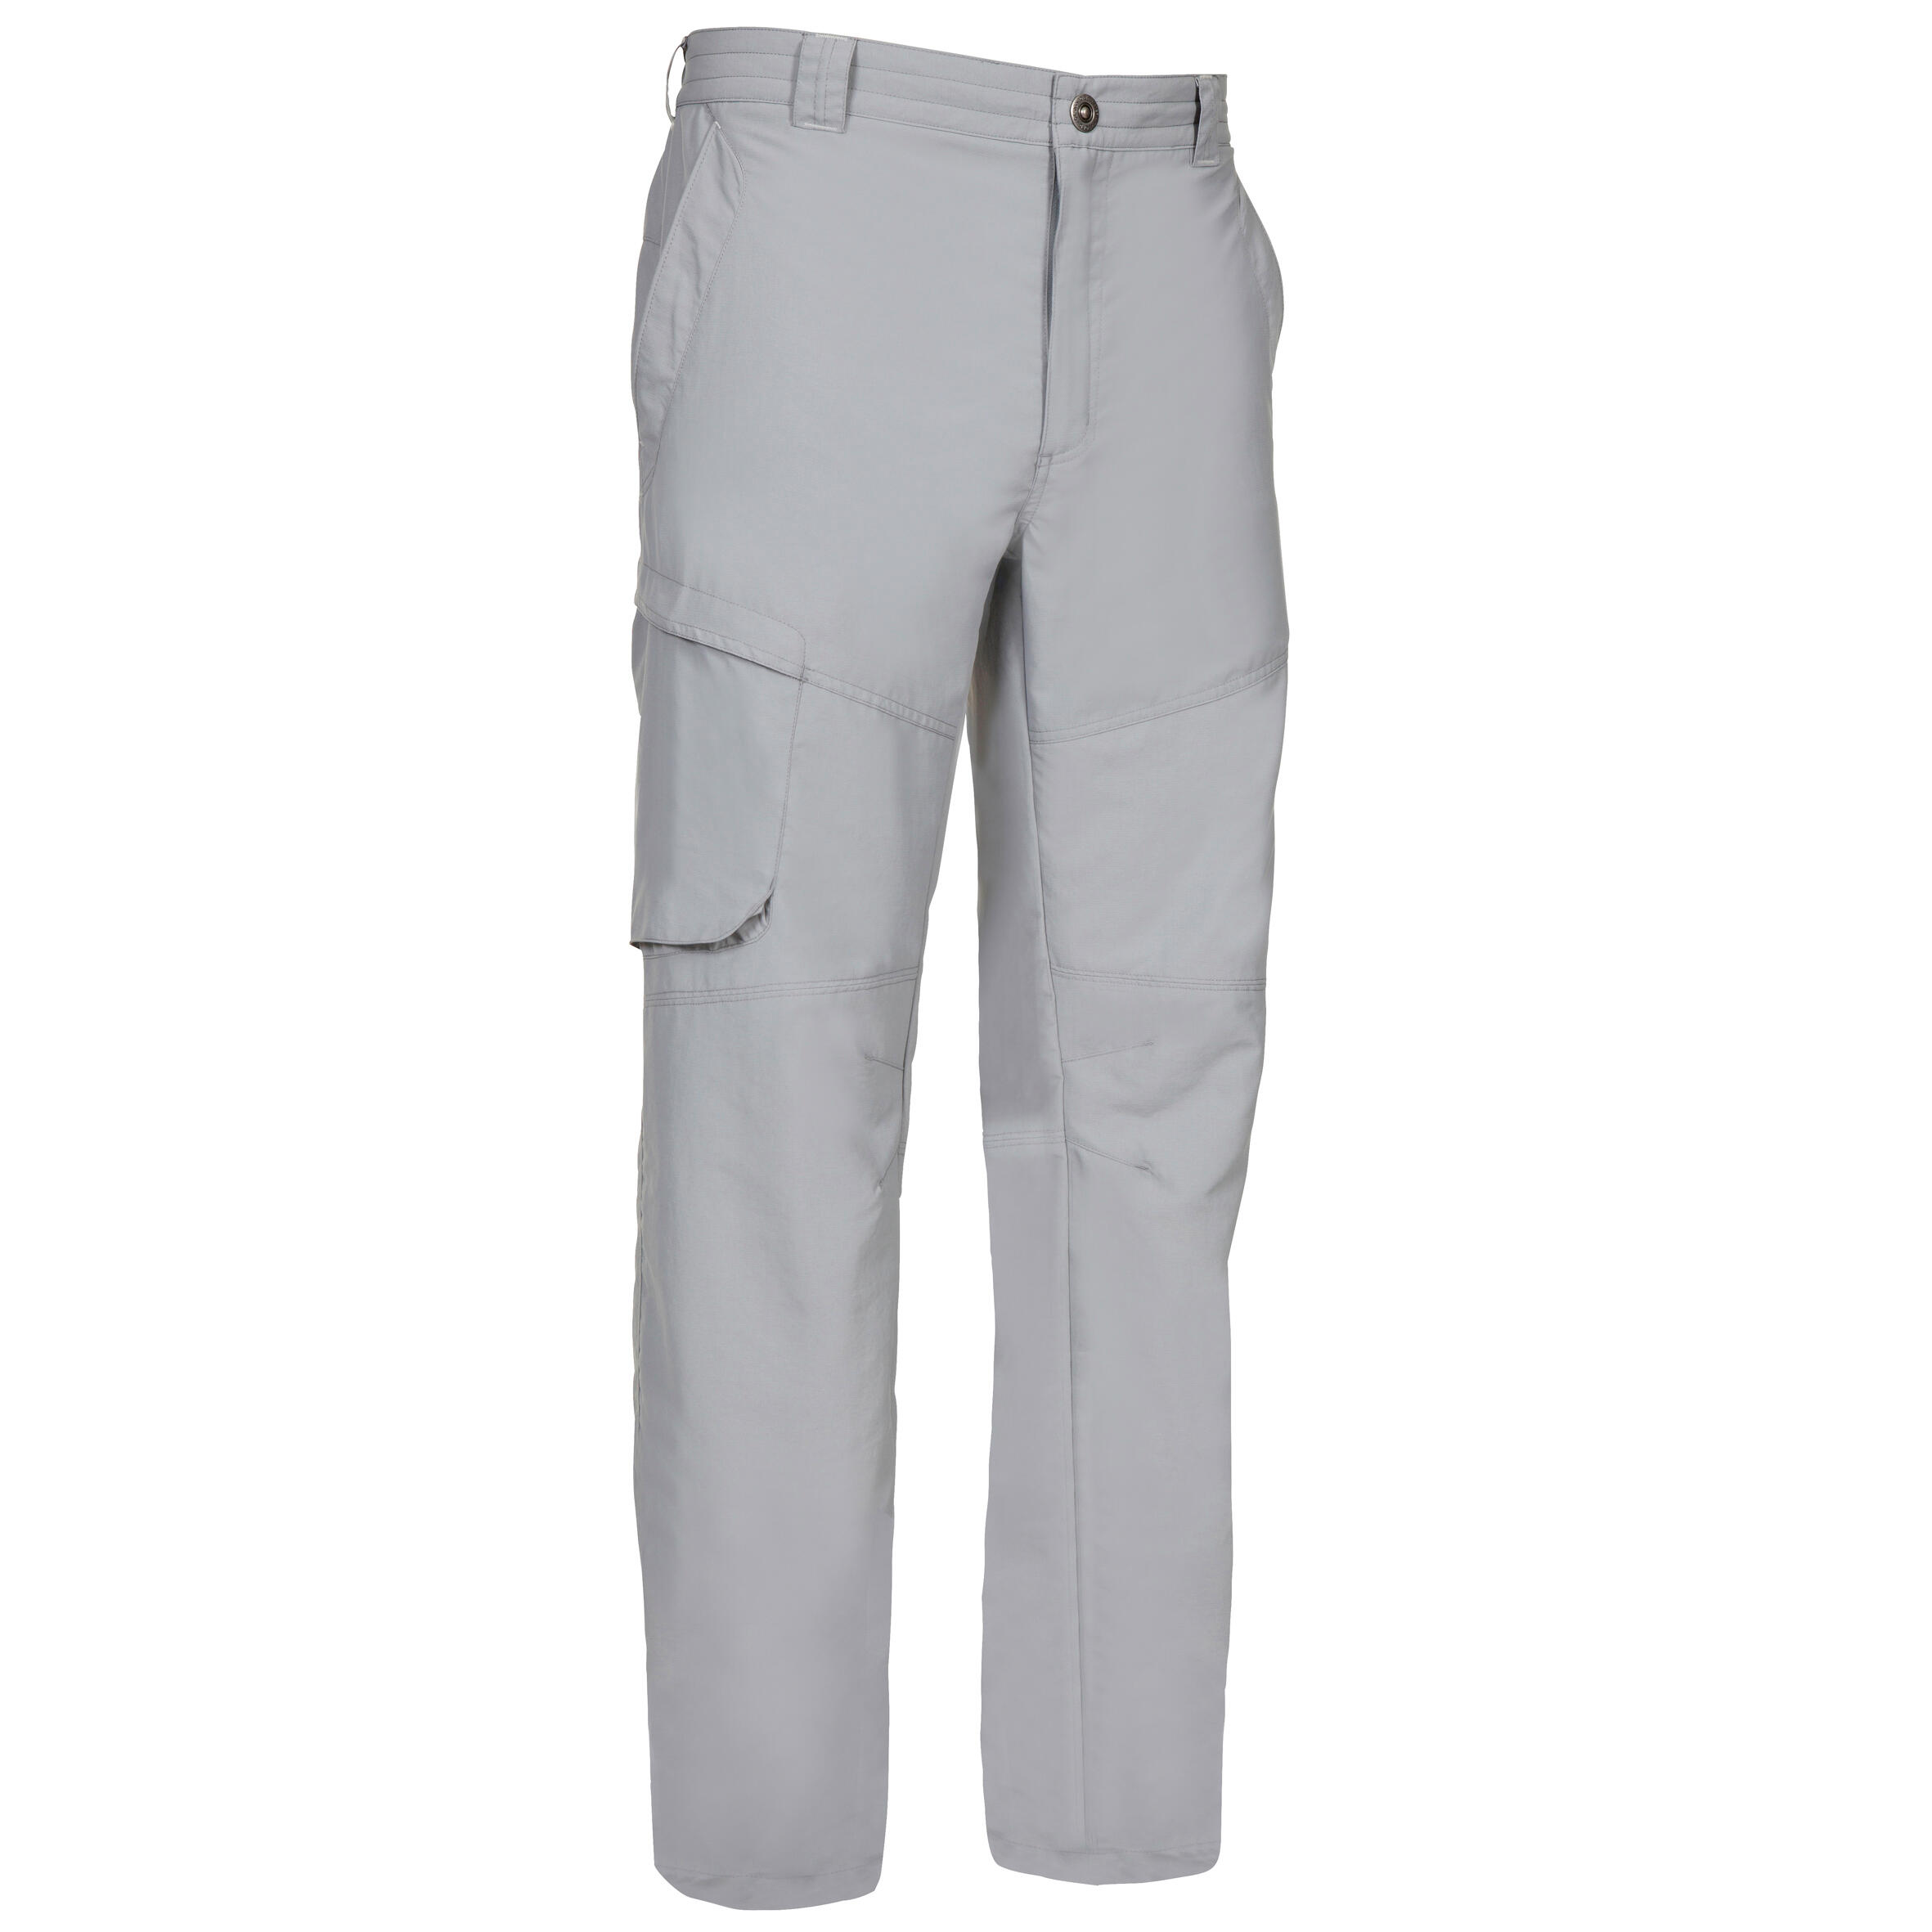 TRIBORD M Ozean Trousers Light Grey water repellent and UV protection.